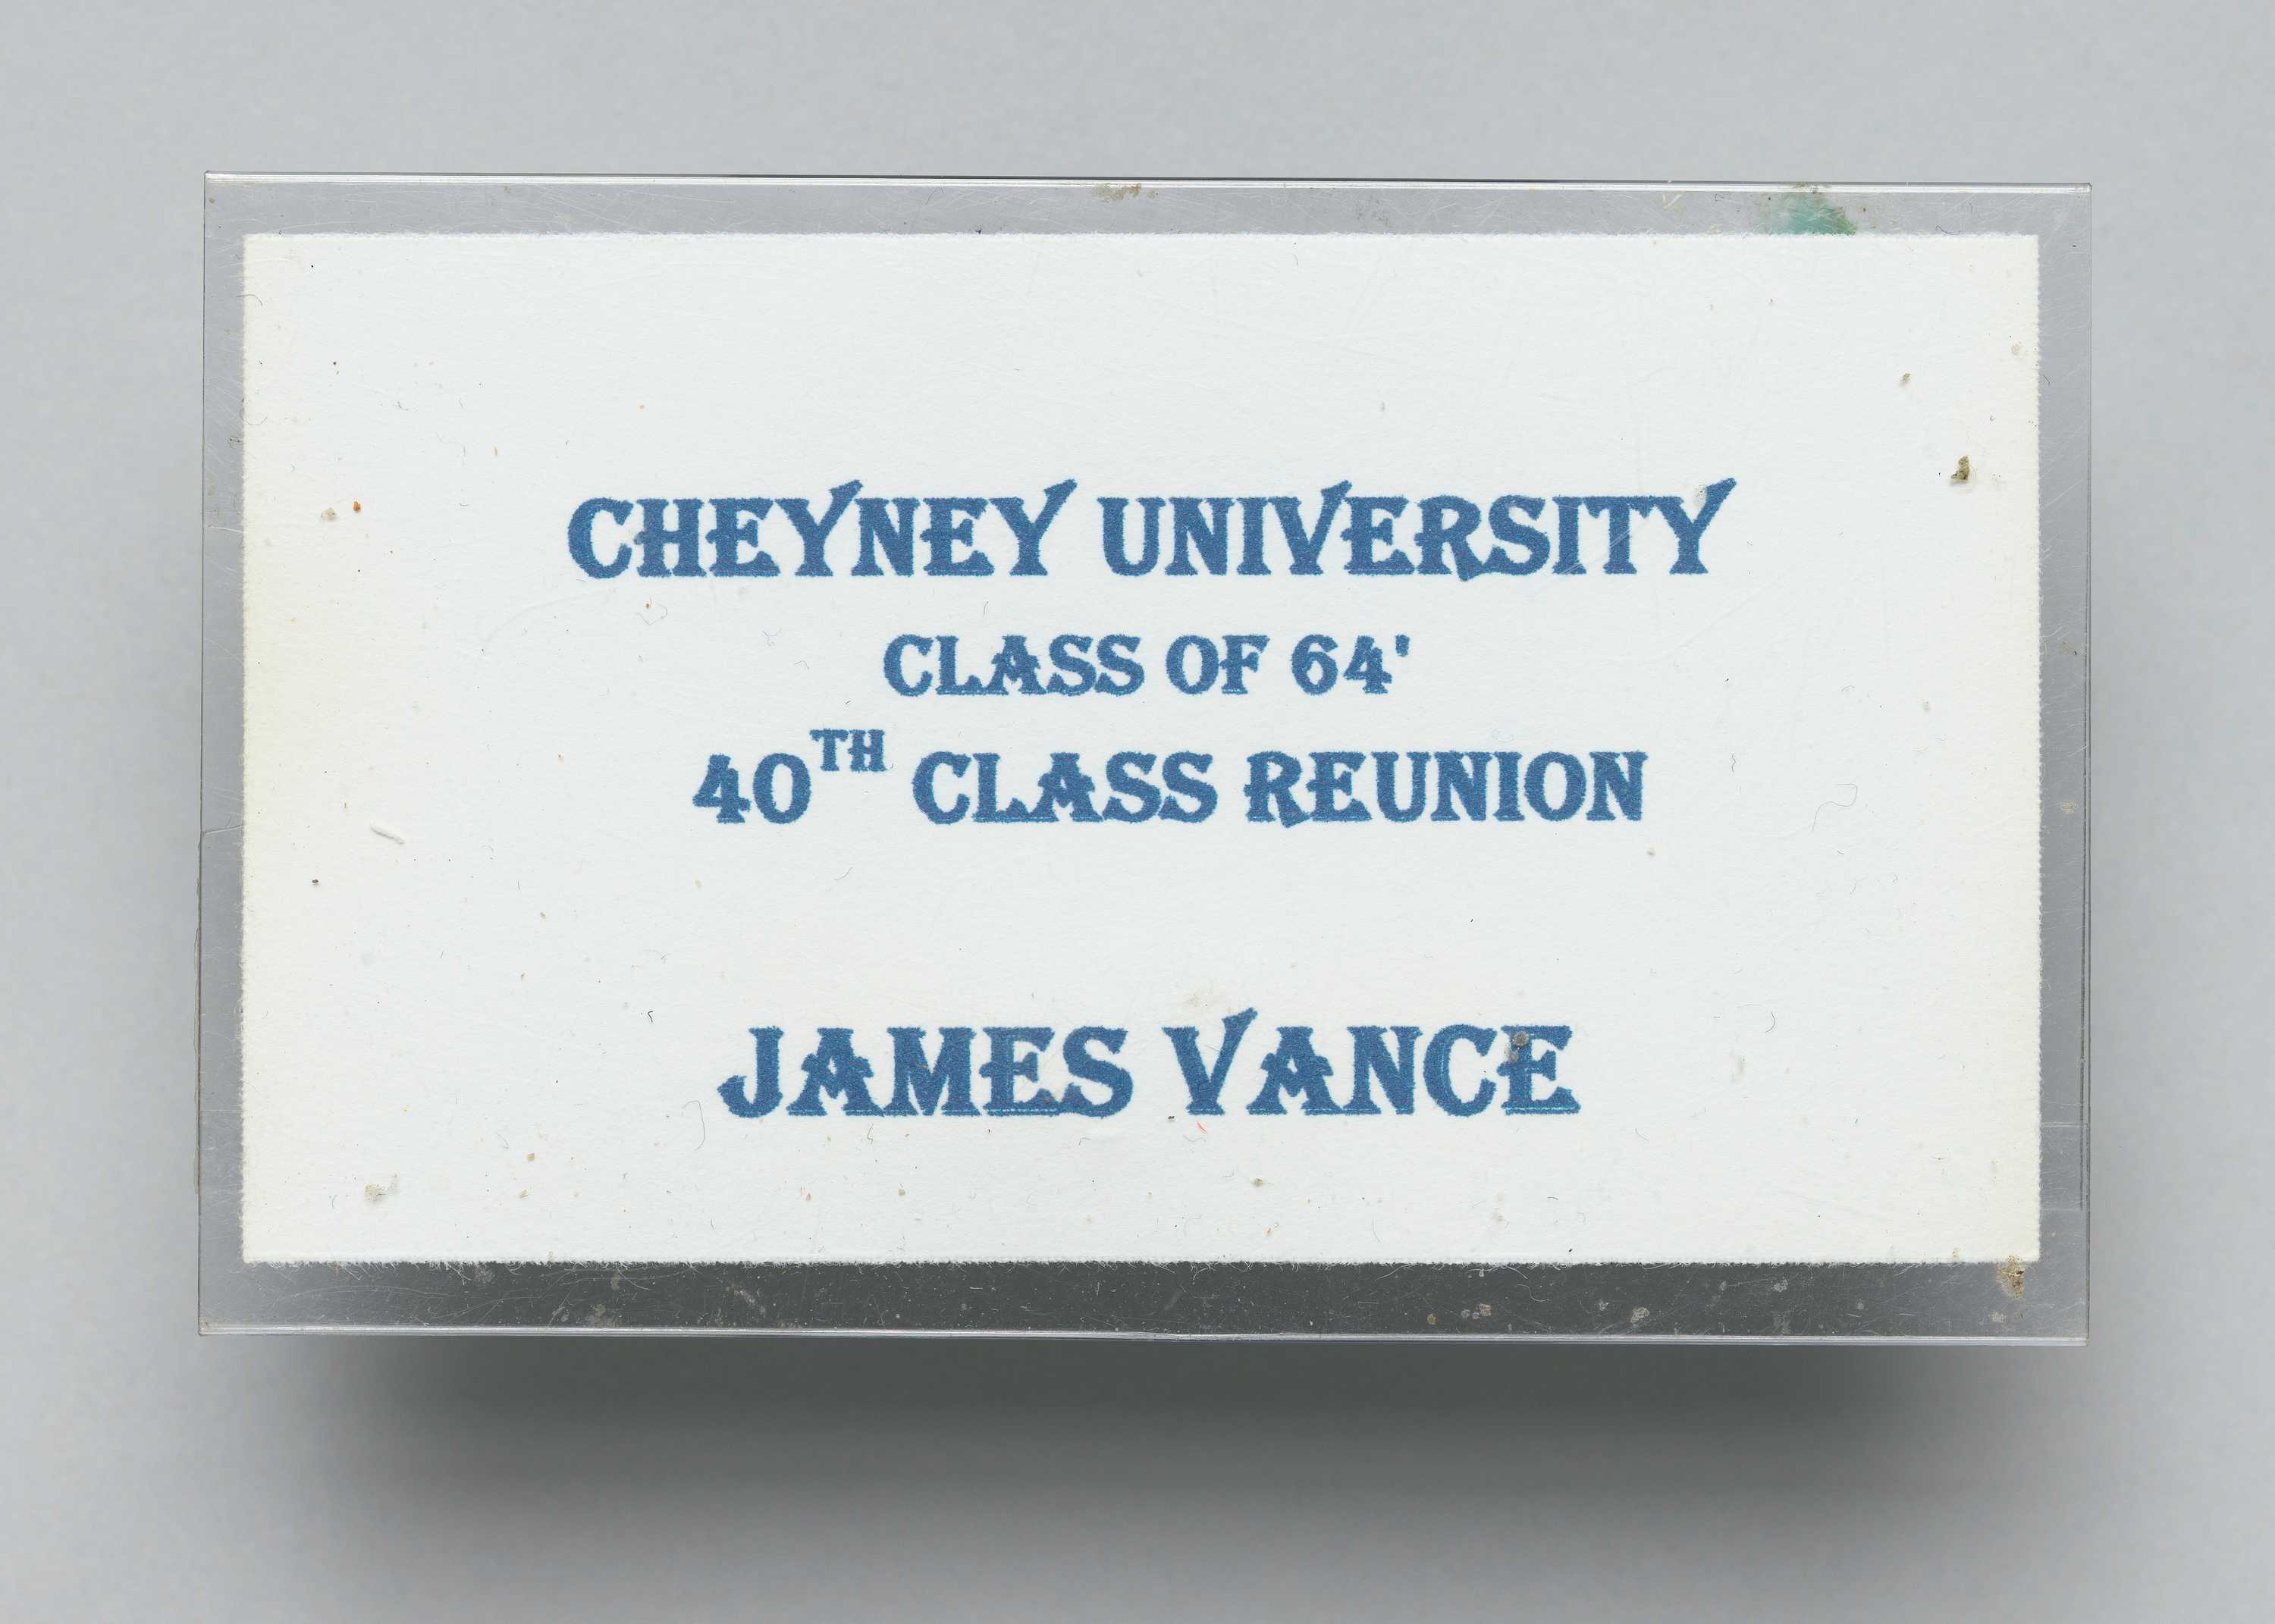 A name tag from the Cheyney University class of 1964 40th class reunion owned by Jim Vance.